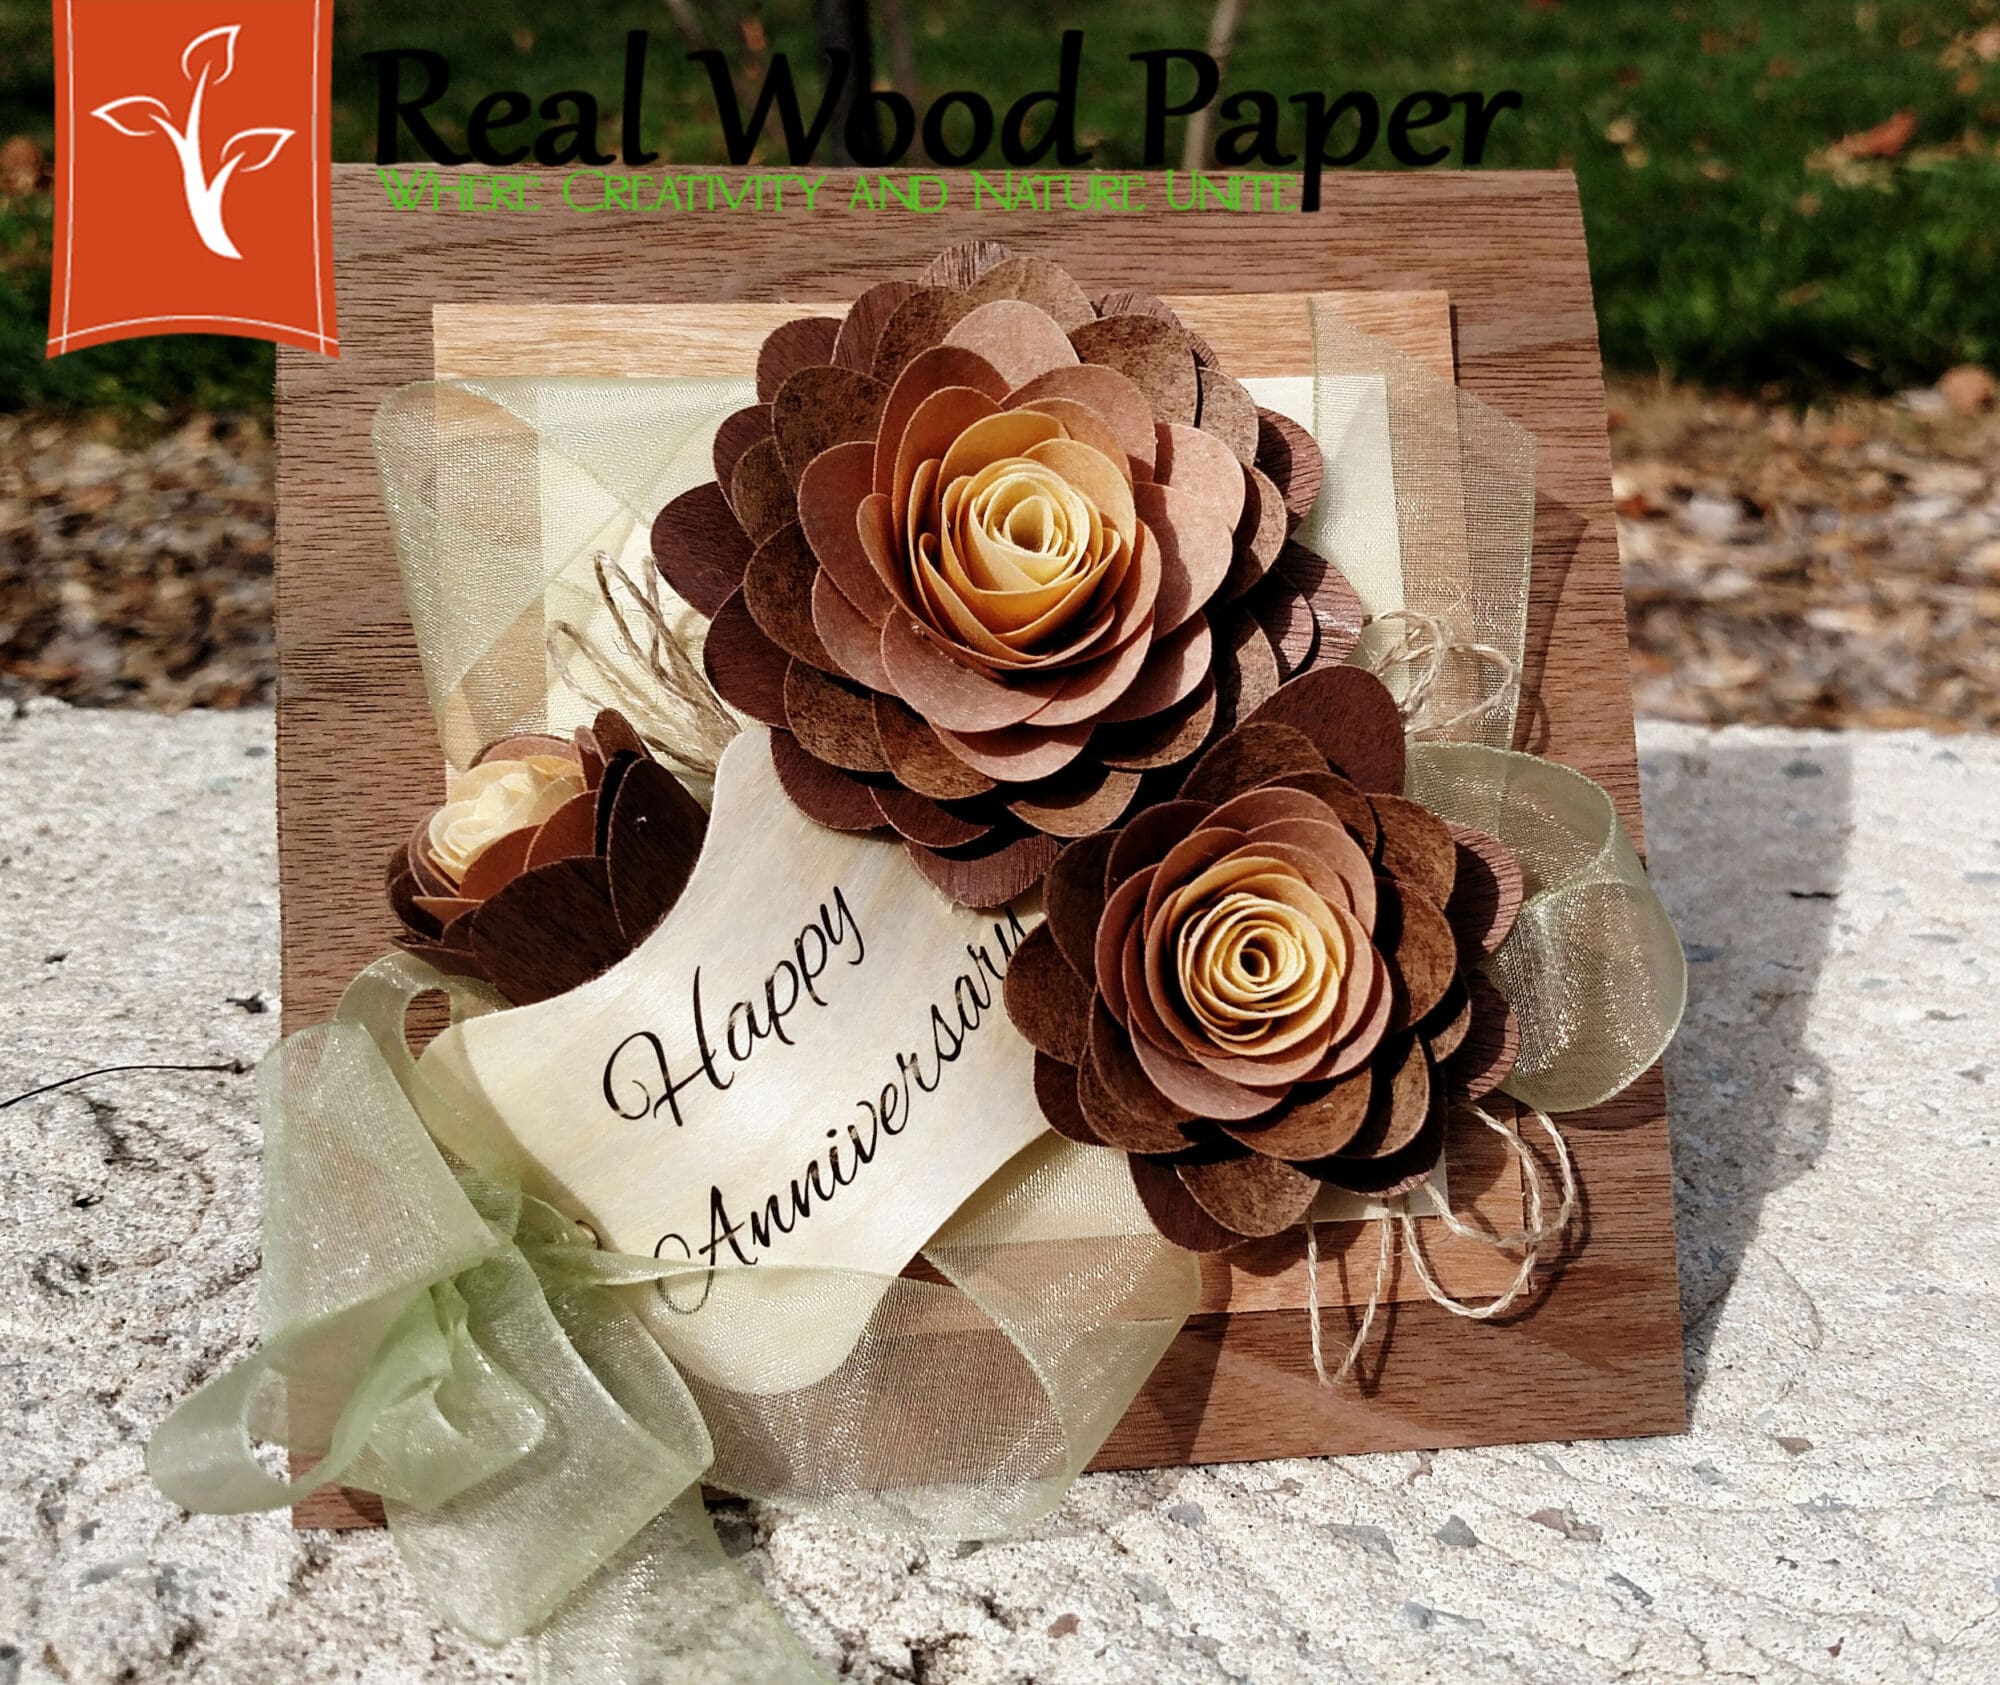 Real Wood Paper Anniversary Card with Flowers